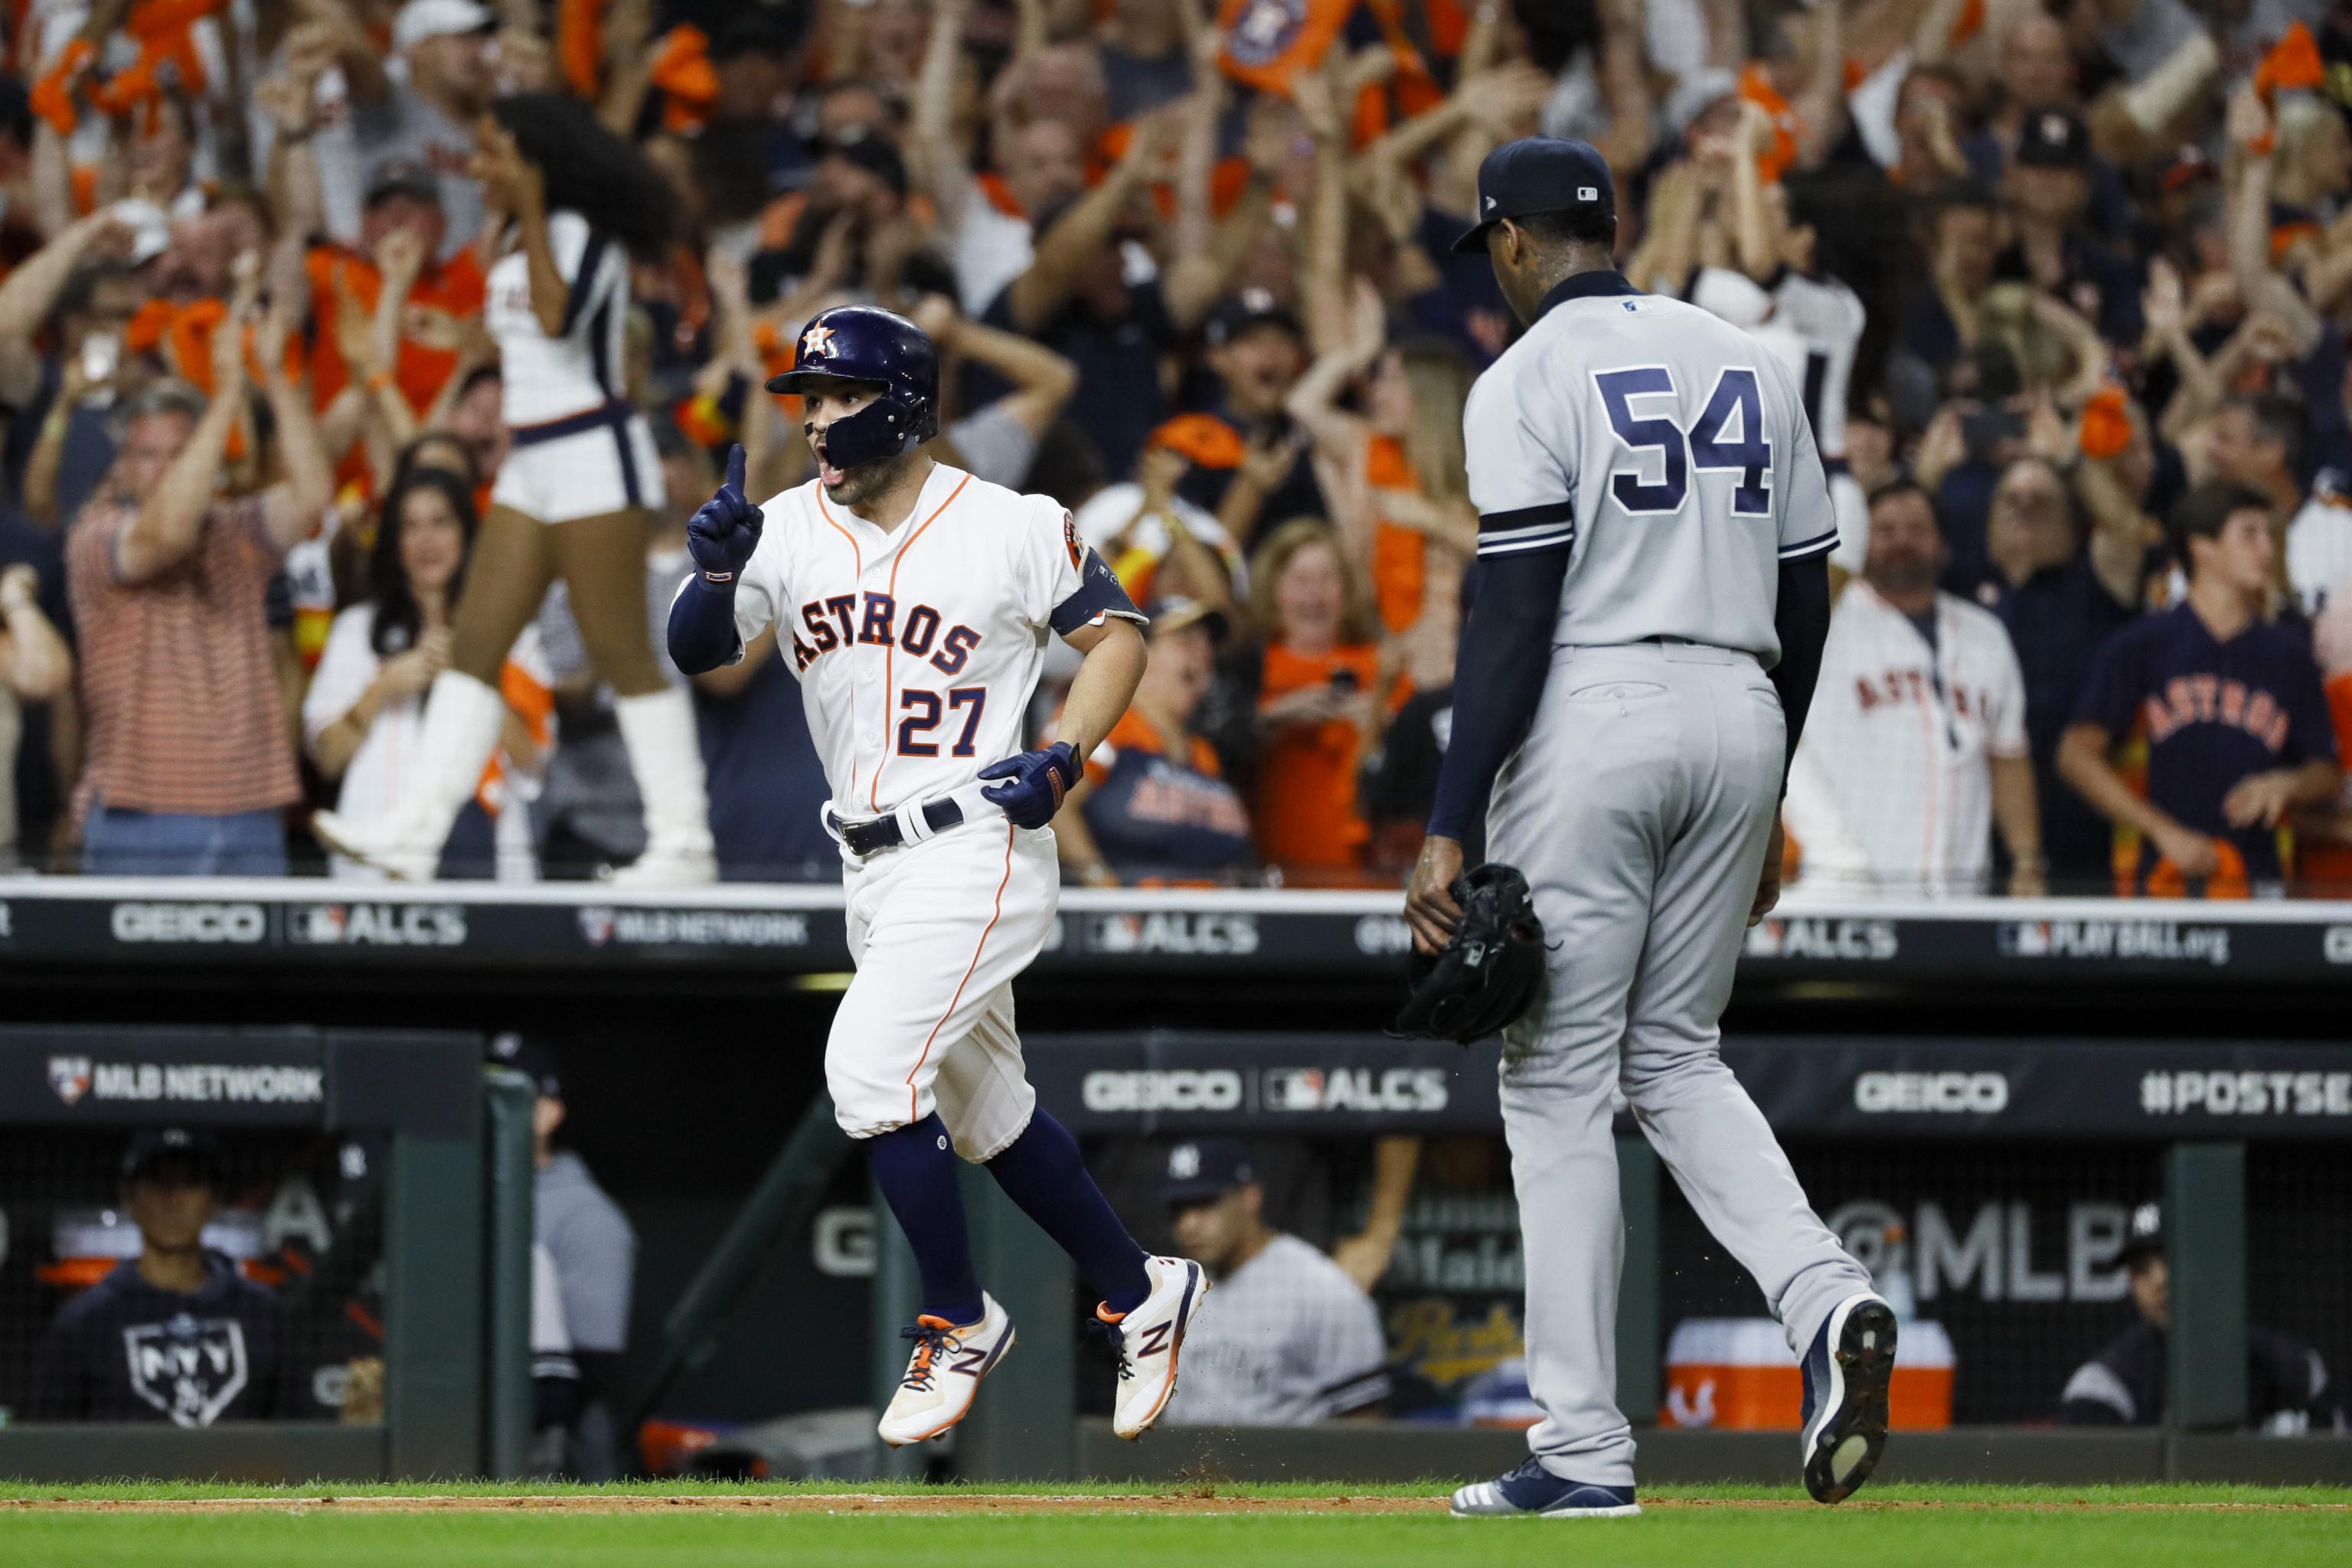 Yankees Fan Reacts to Astros World Series Win